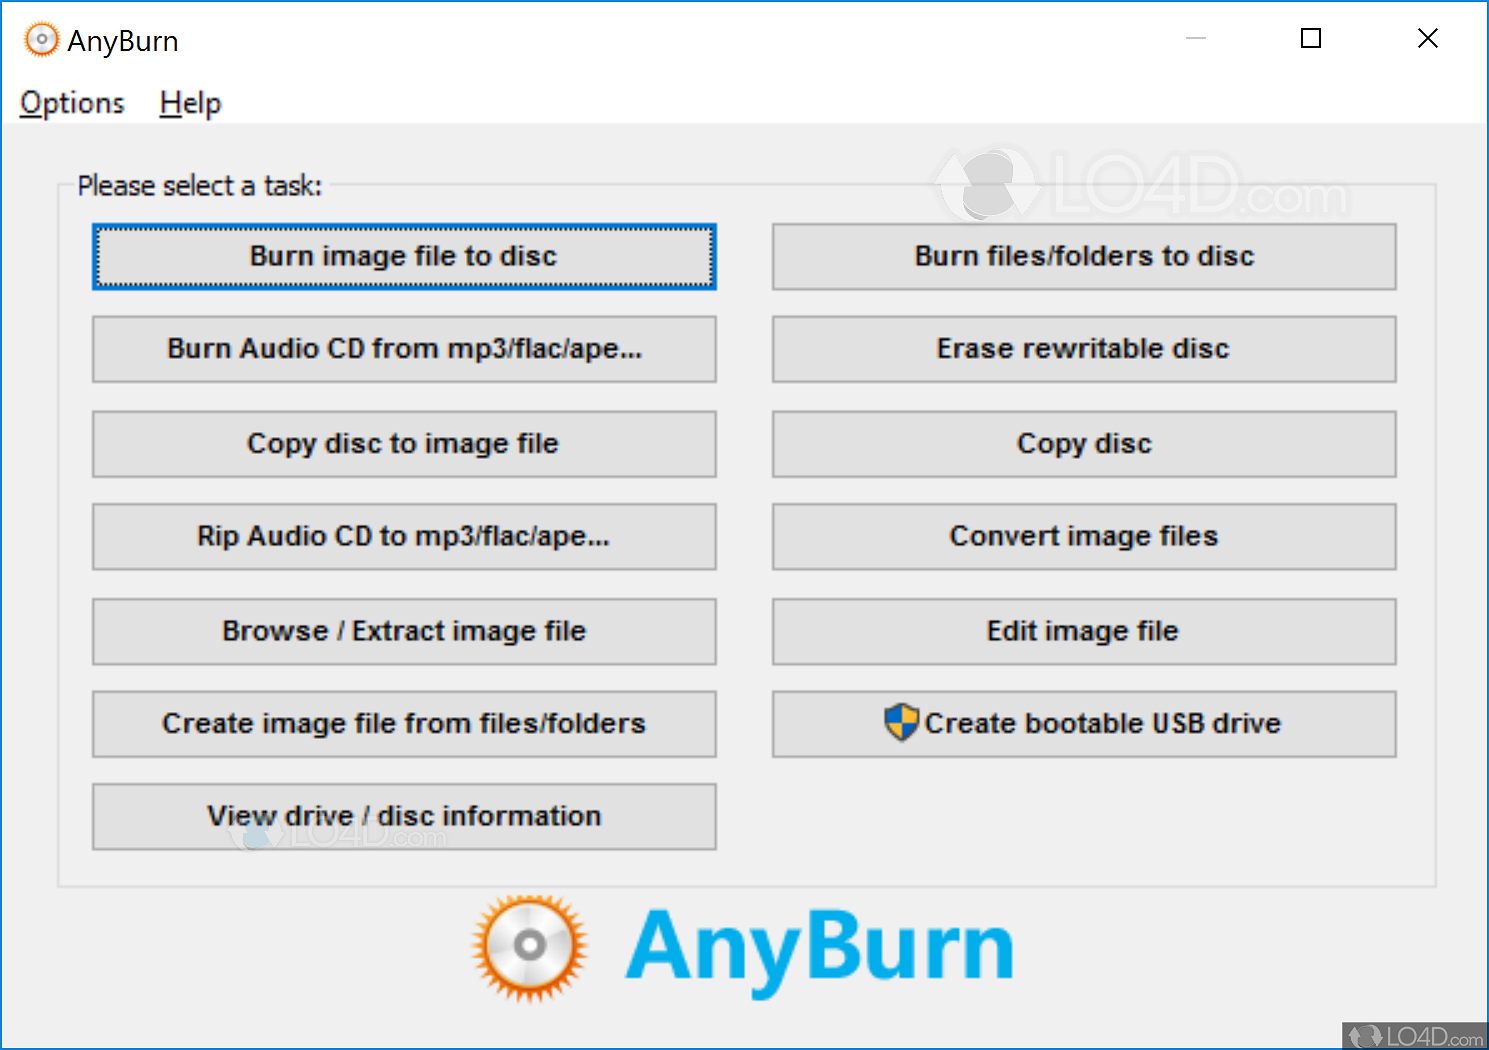 download the new version for windows AnyBurn Pro 5.7